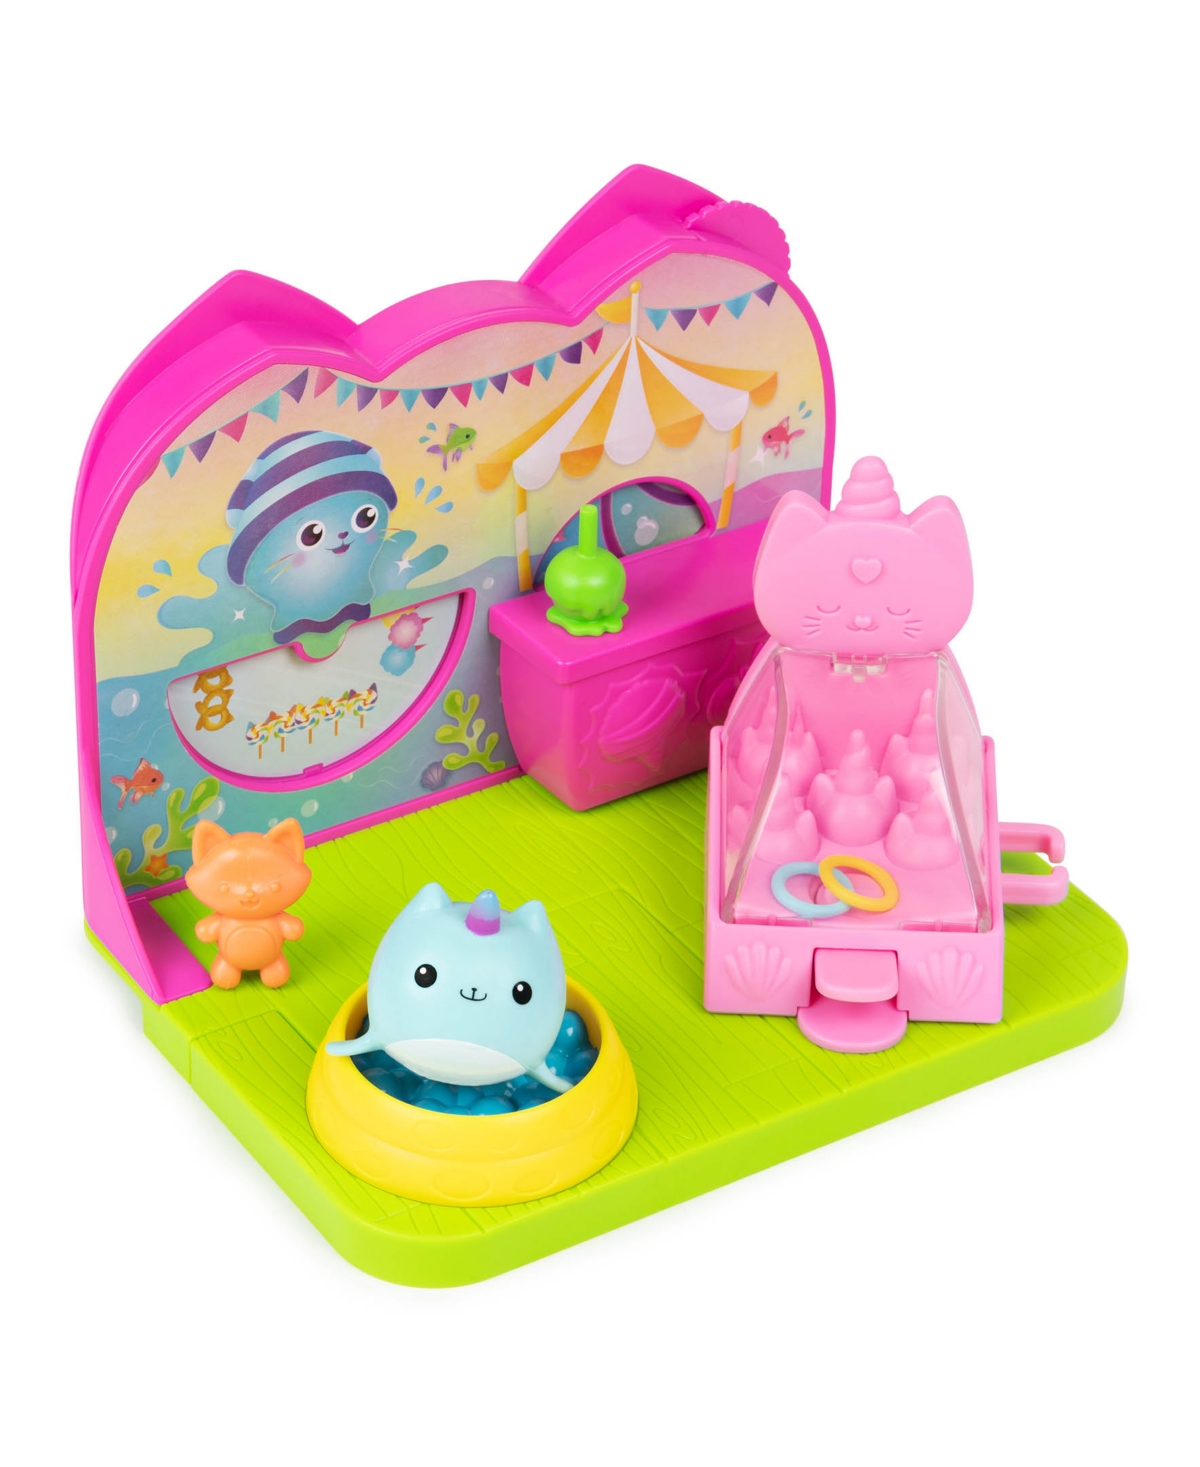 Gabby's Dollhouse Kids' Dreamworks Kitty Narwhal's Carnival Room, With Toy Figure, Surprise Toys And Dollhouse Furniture In Multi-color